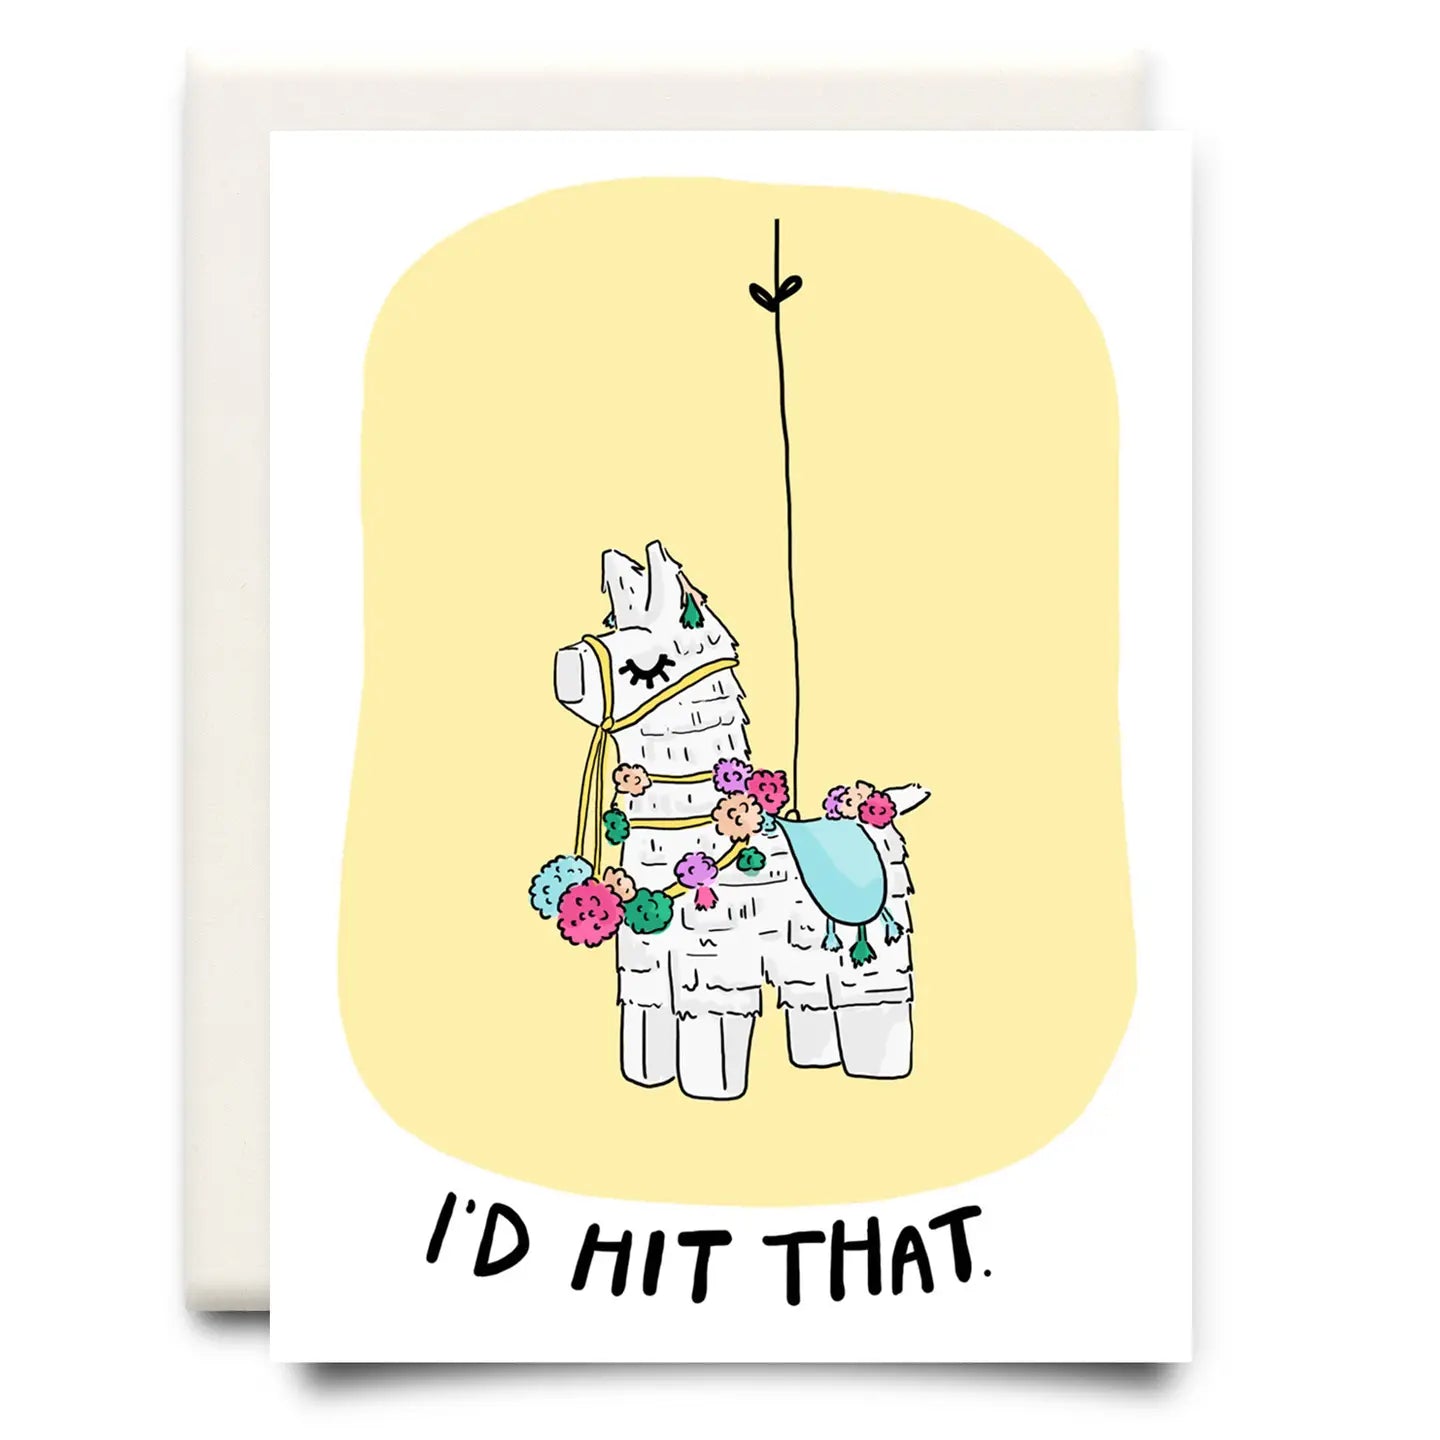 Inkwell Cards “I’d Hit That” Card